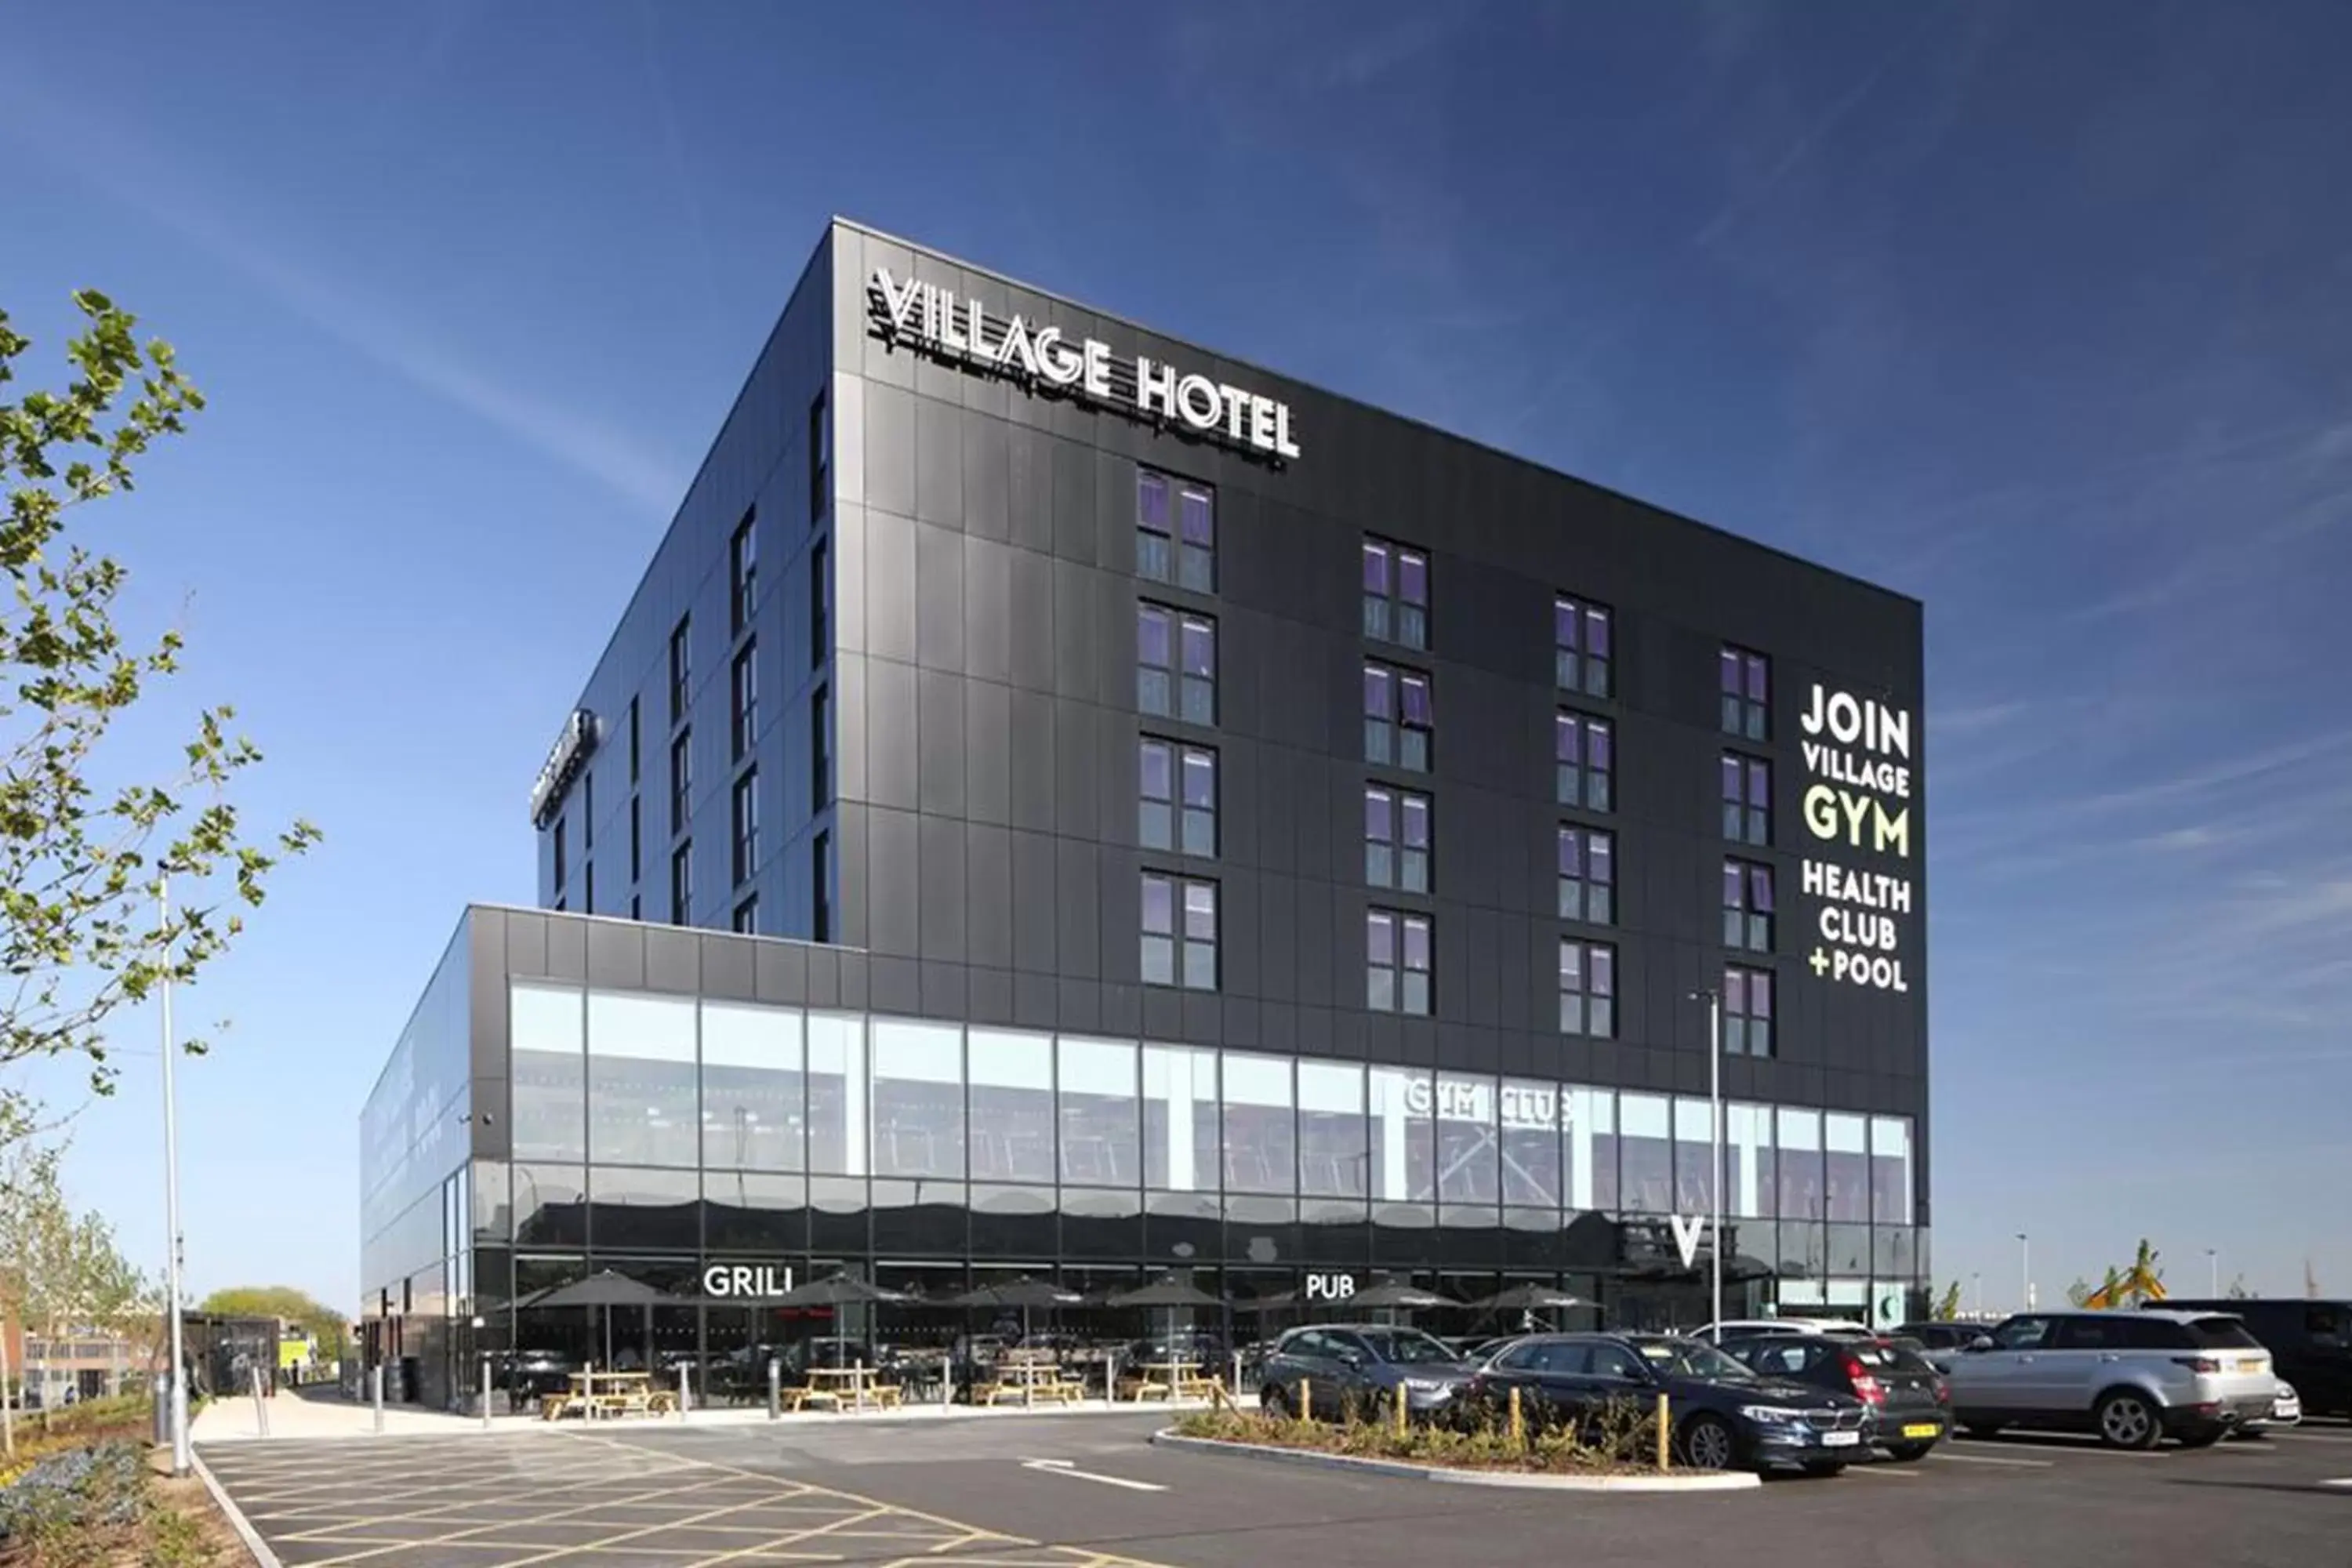 Property building in Village Hotel Southampton Eastleigh